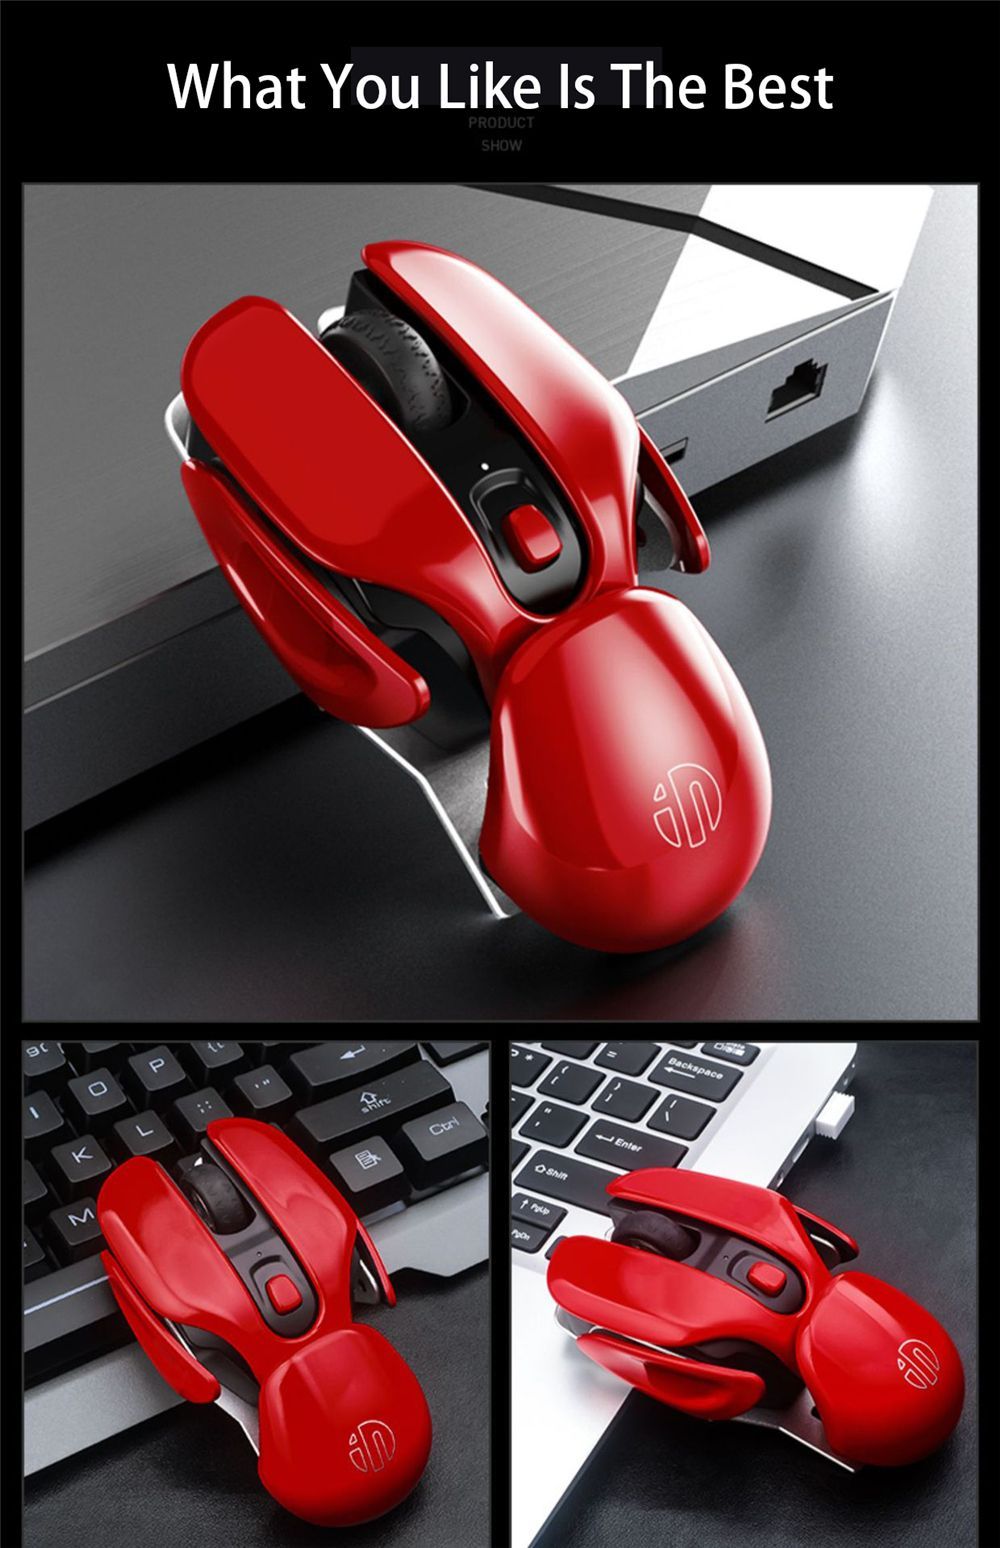 Inphic-PX2-24G-Wireless-Rechargeable-Mouse-1600DPI-Mute-Button-Two-Colors-Optical-Mouse-for-PC-Lapto-1739598